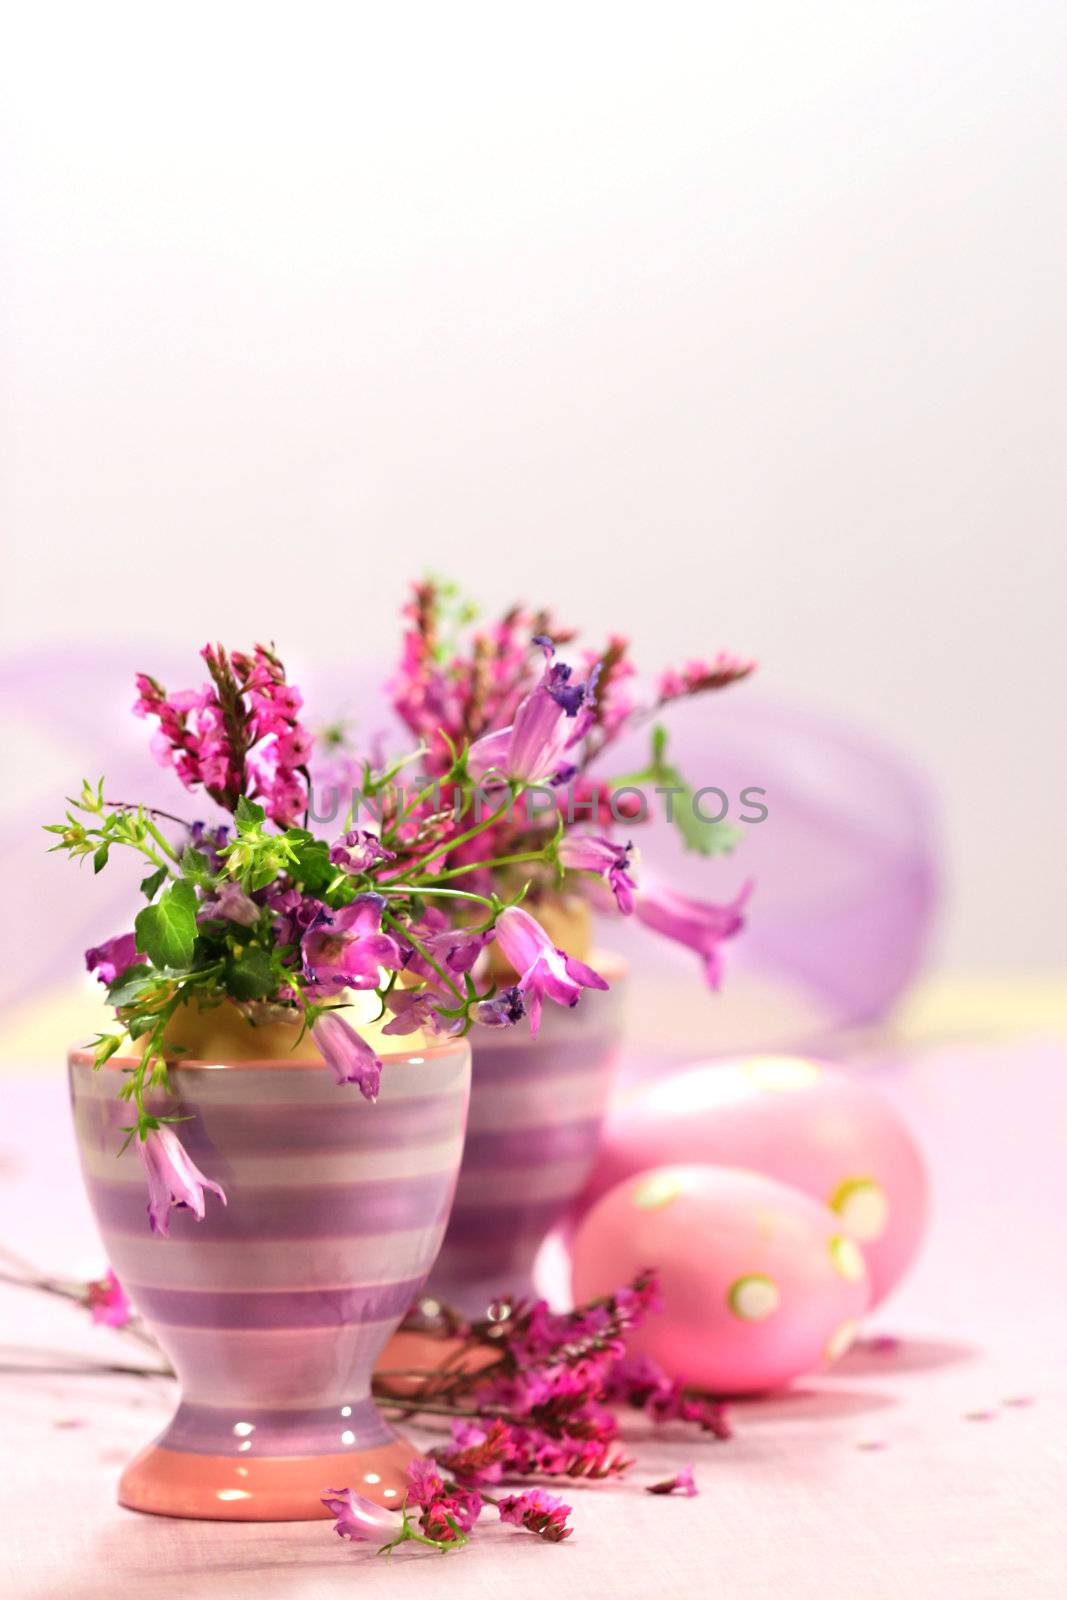 Egg cups with flowers by Sandralise